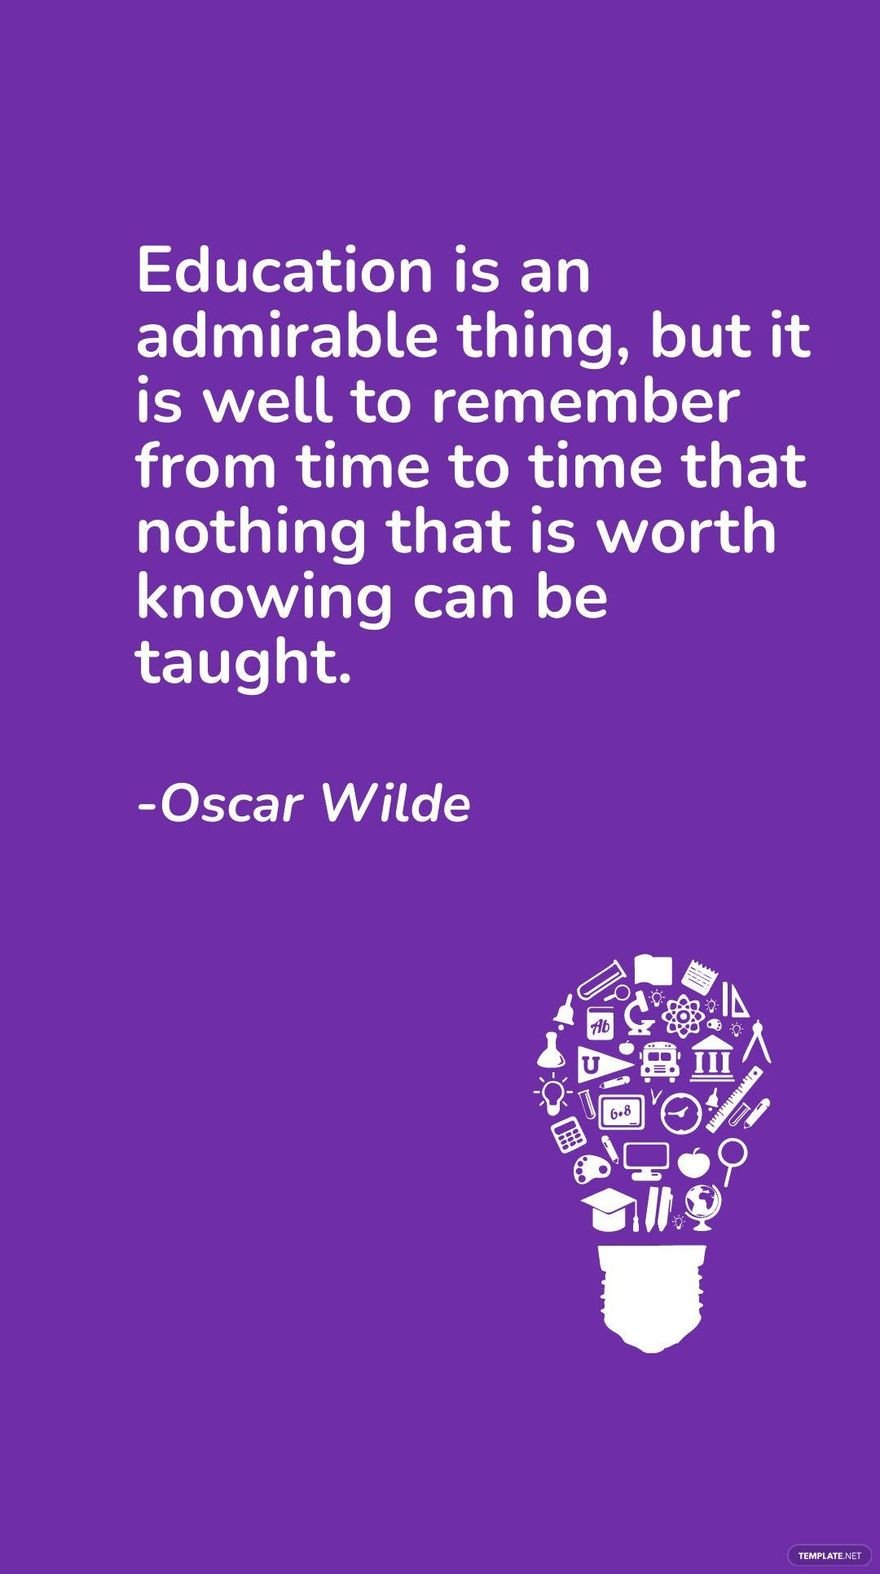 Oscar Wilde -Education is an admirable thing, but it is well to remember from time to time that nothing that is worth knowing can be taught.